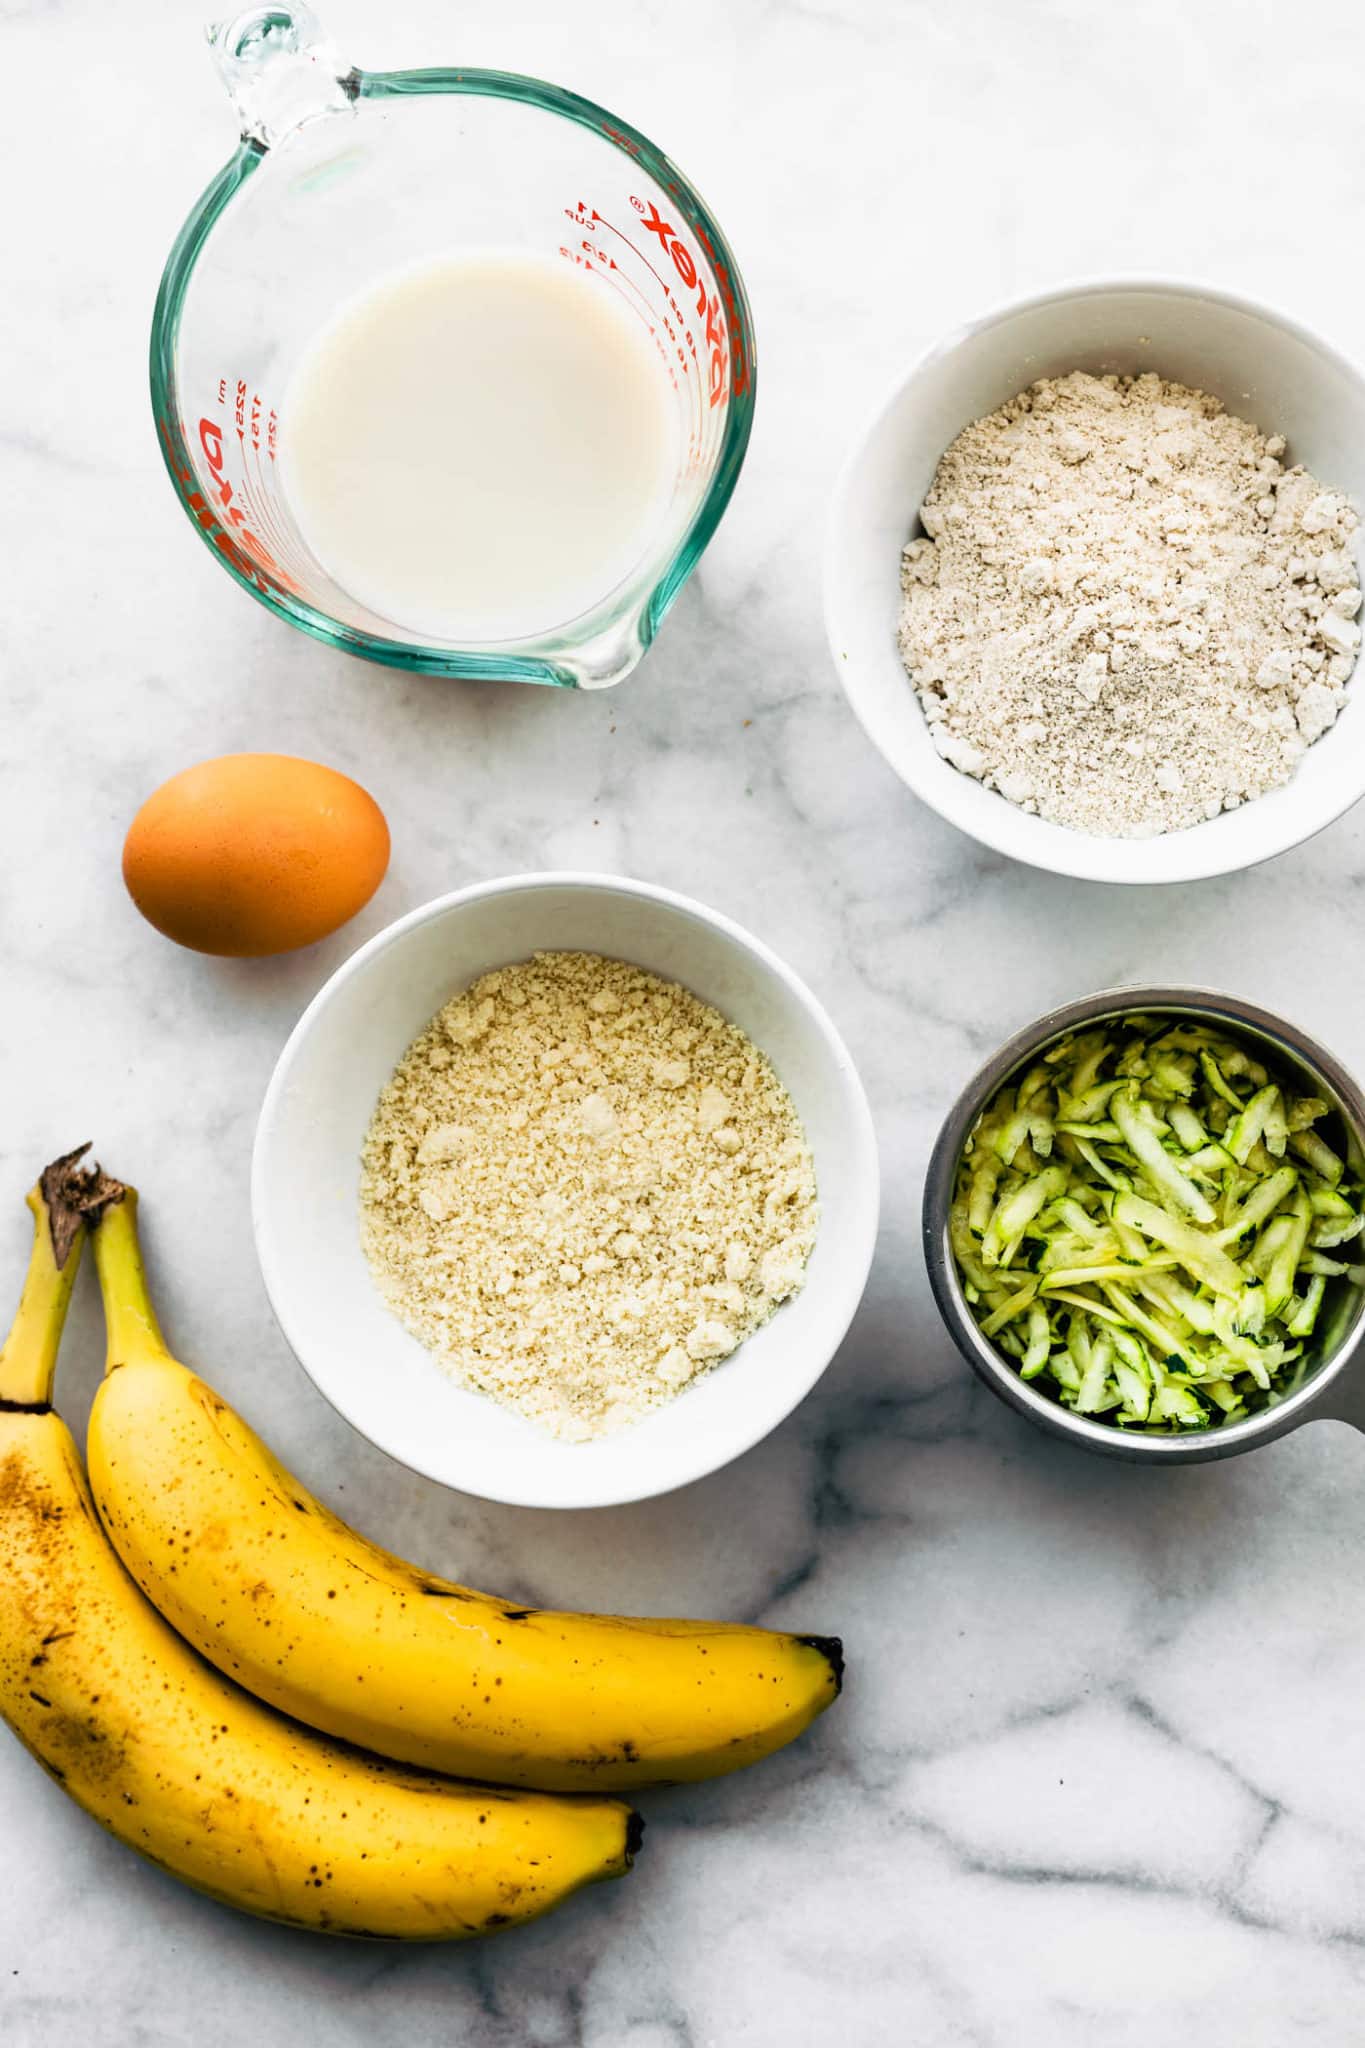 overhead image of ingredients for gluten free zucchini muffins including non-dairy milk, oat flour, almond flour, shredded zucchini, an egg, and two ripe bananas